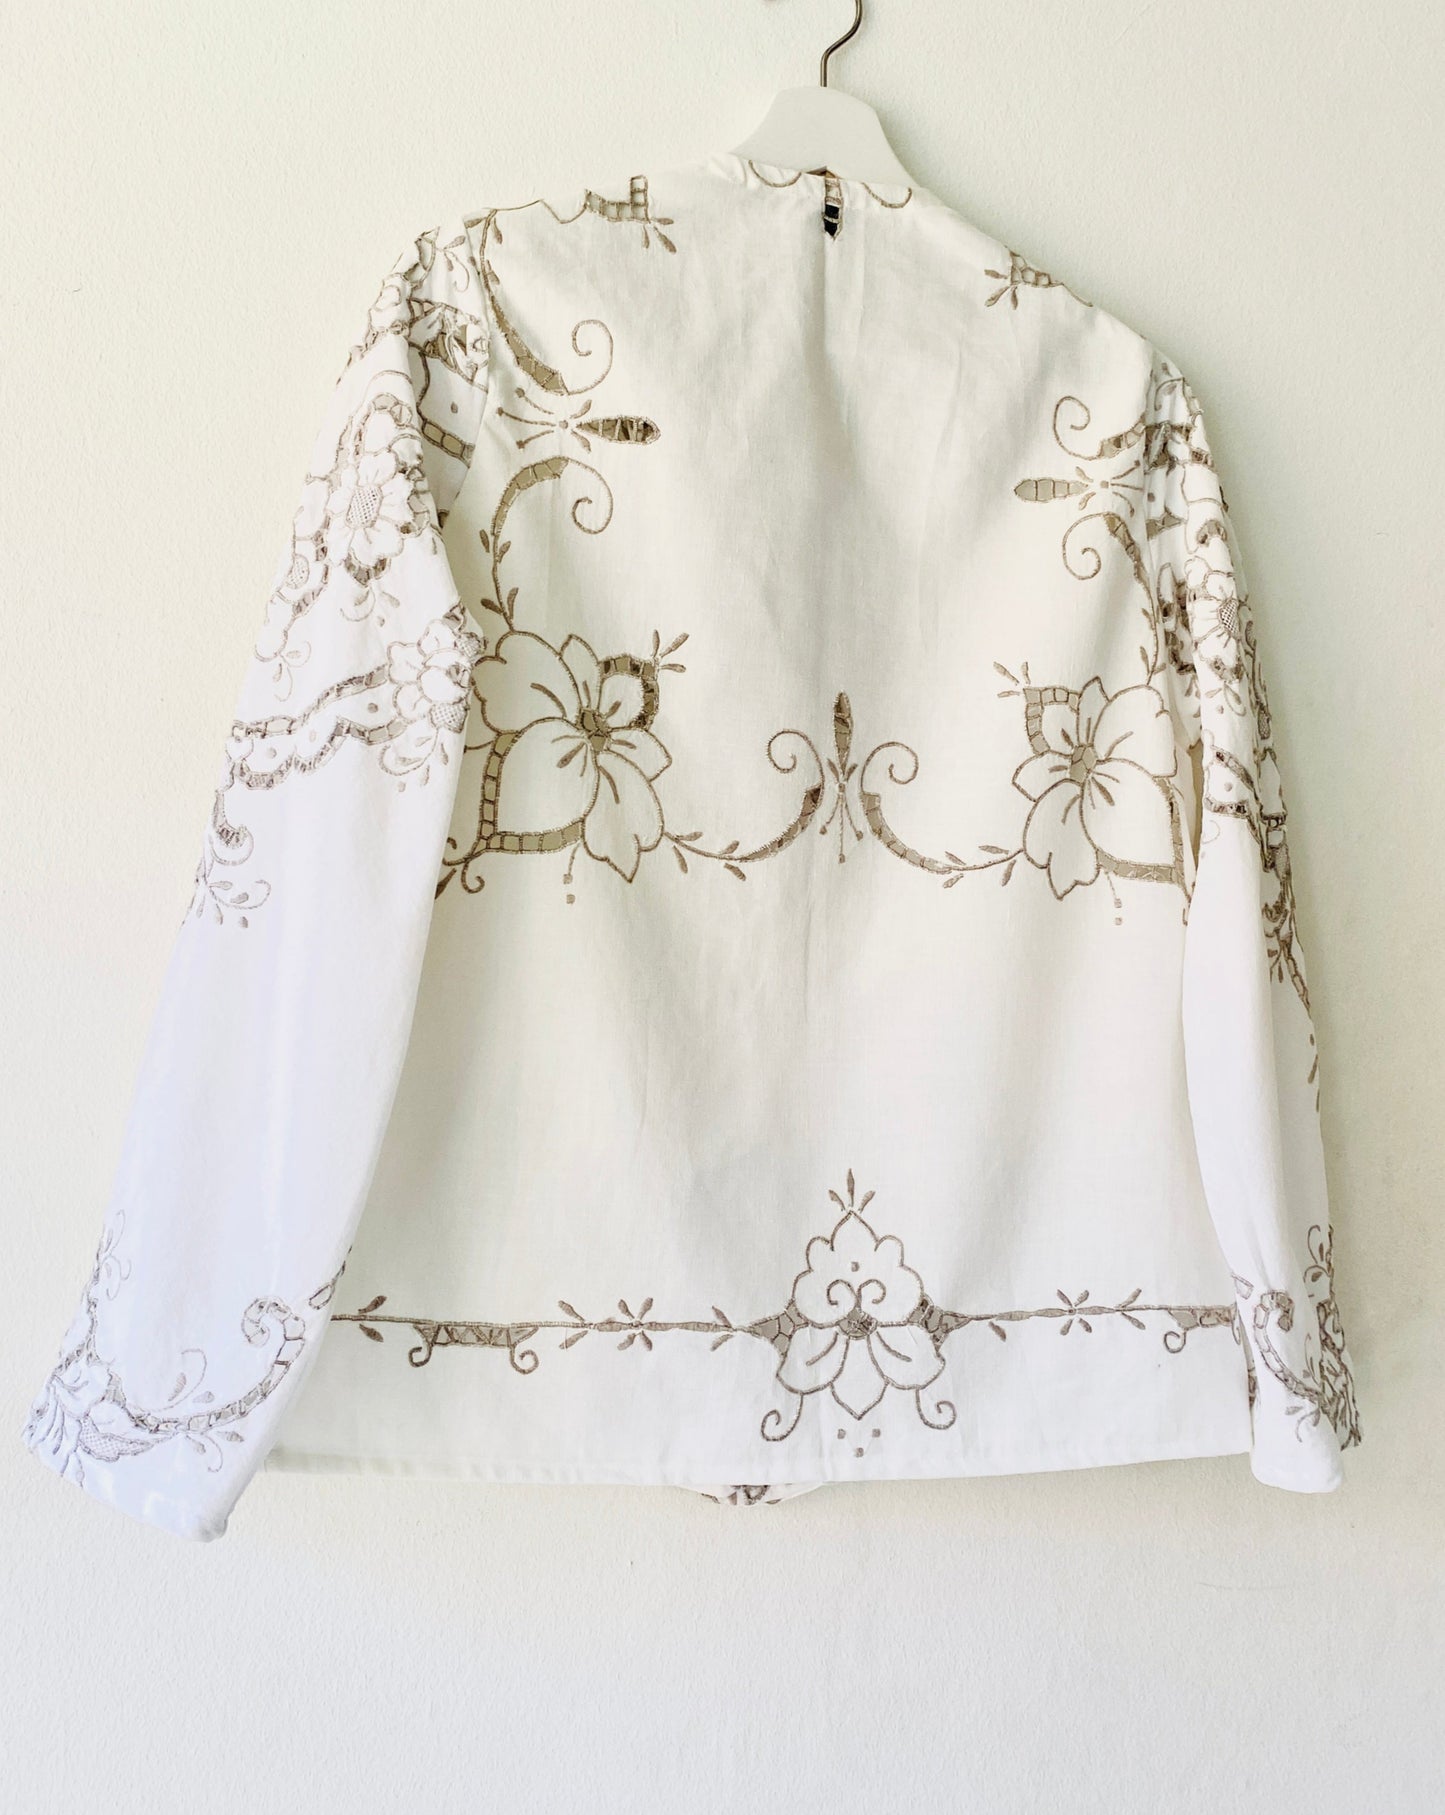 Grand amour lace